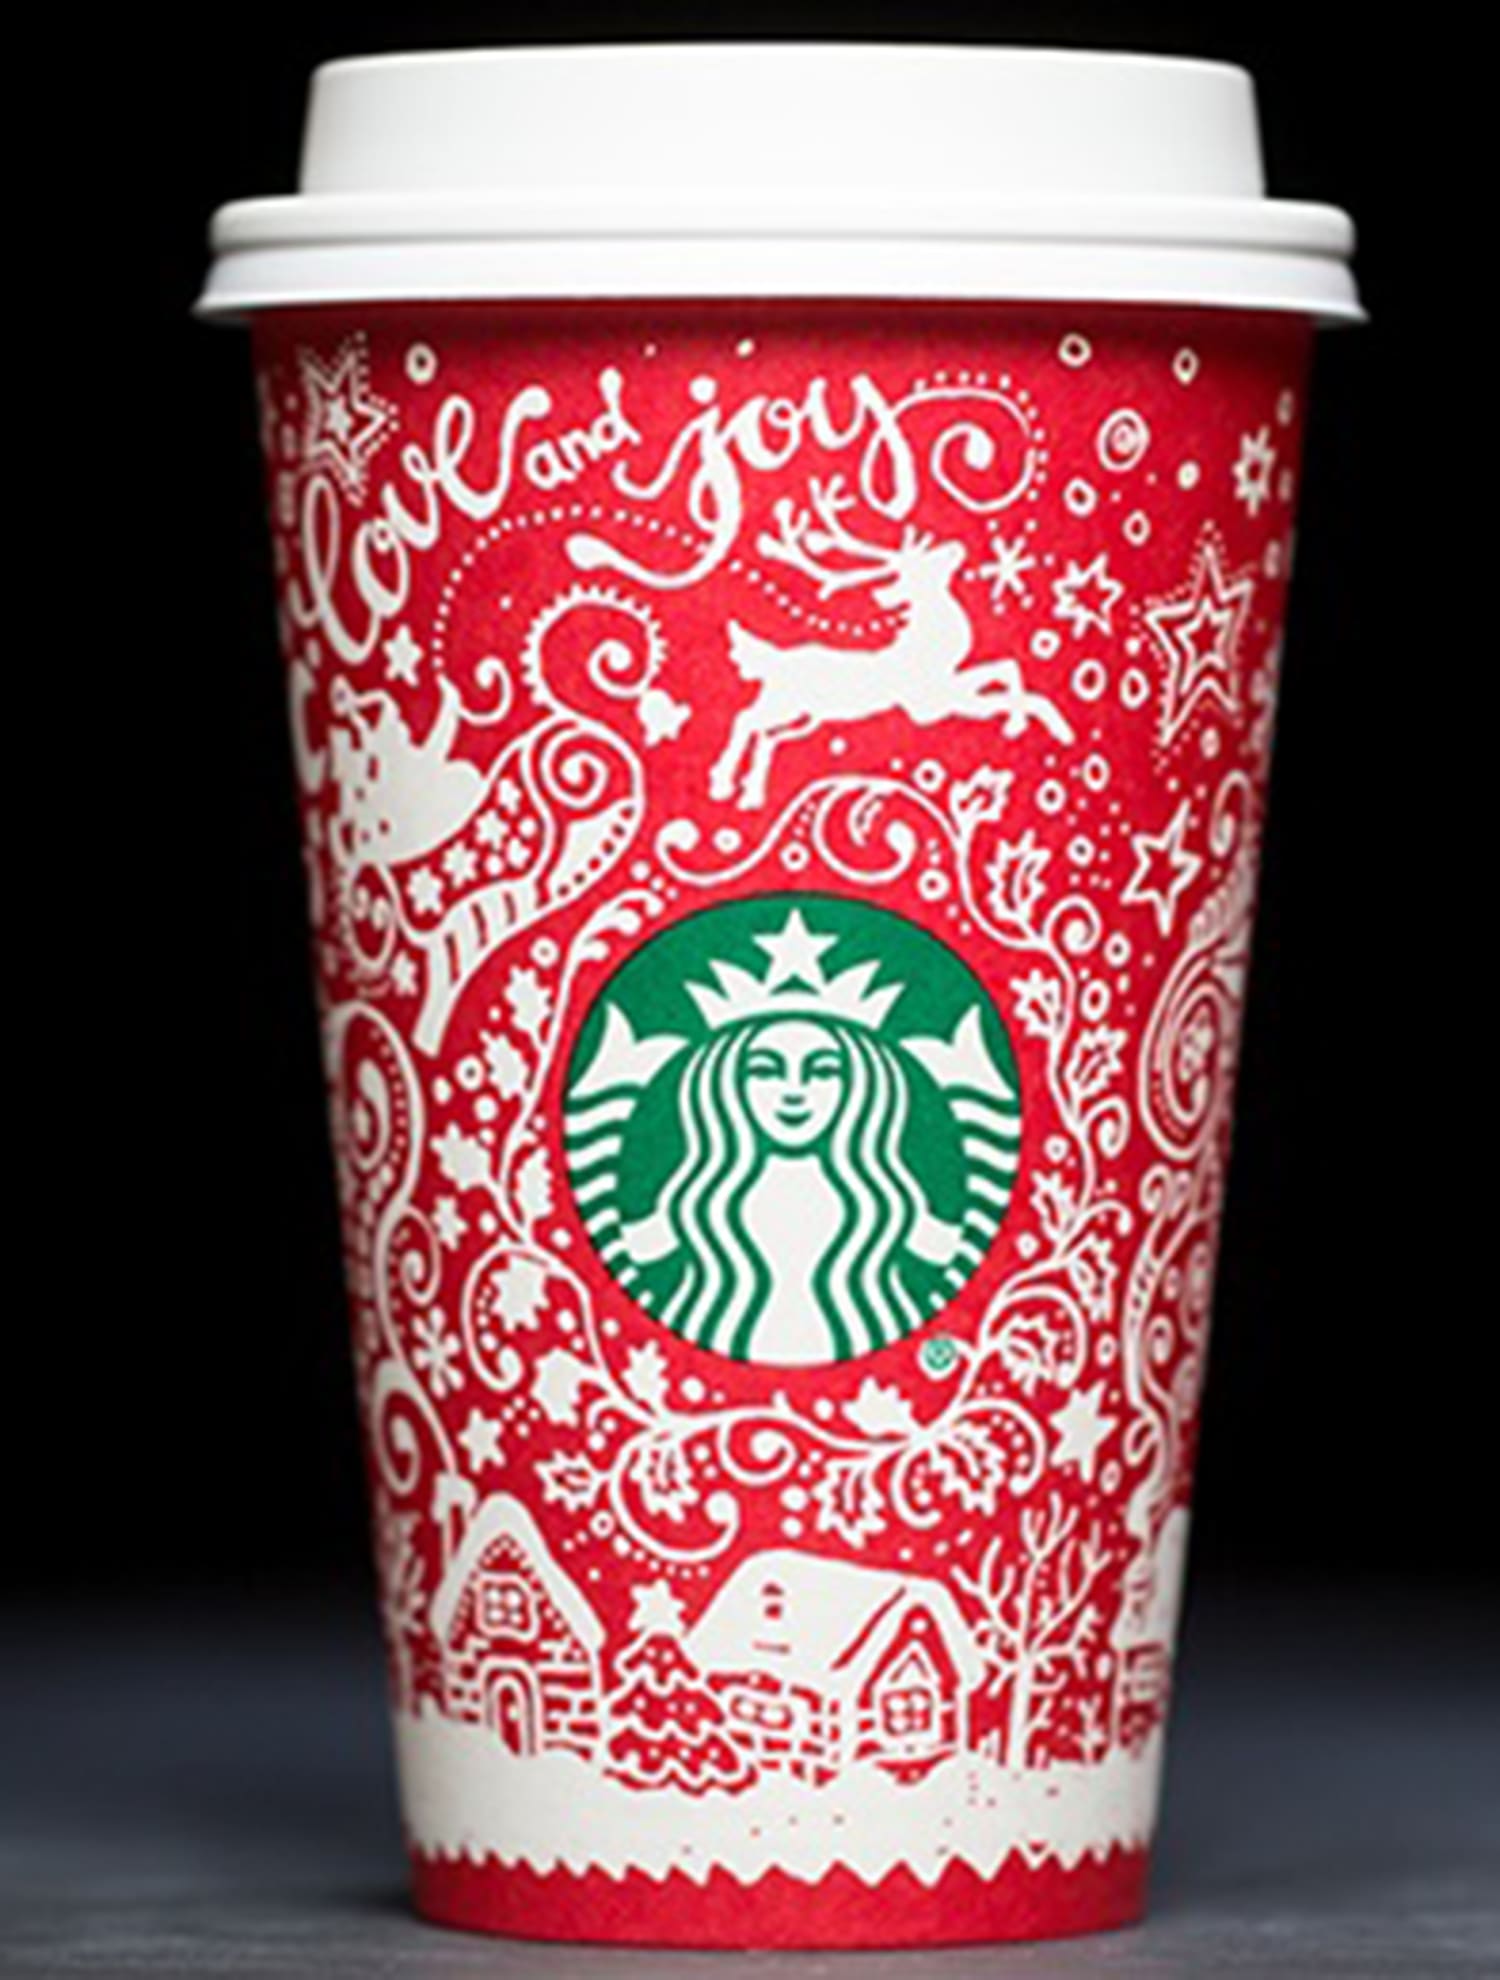 up to 60 off New 2 2019 Cups Holiday Starbucks Home